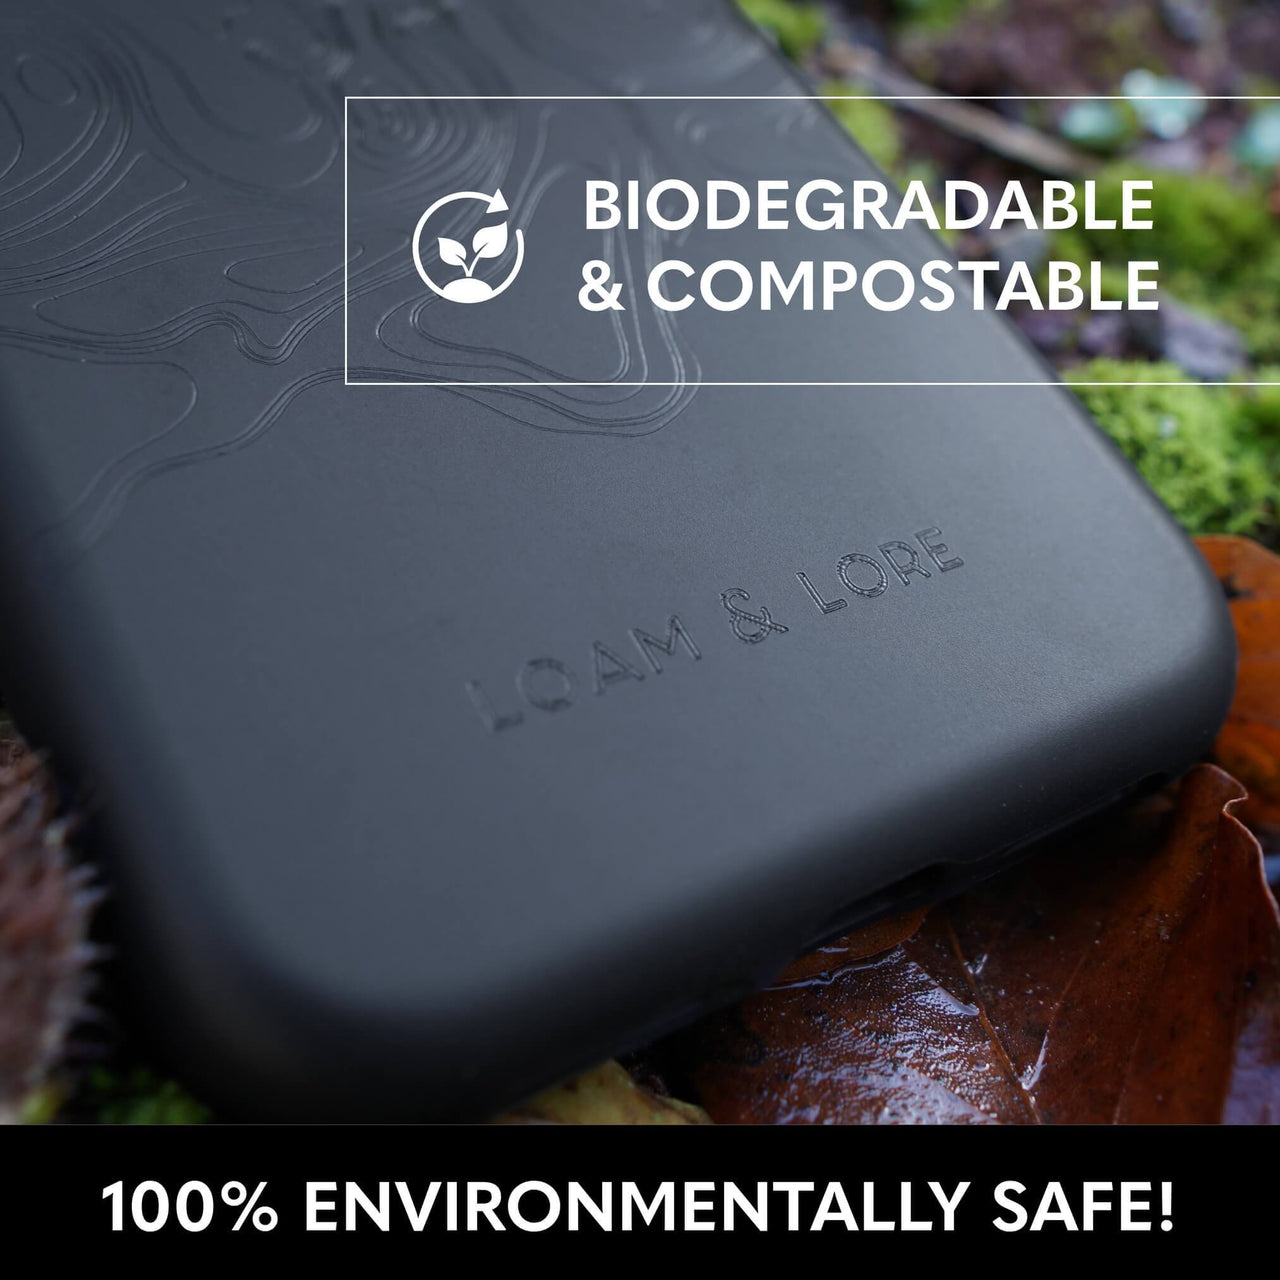 Eco Friendly iPhone XS Max Case Compostable & Biodegradable - Loam & Lore